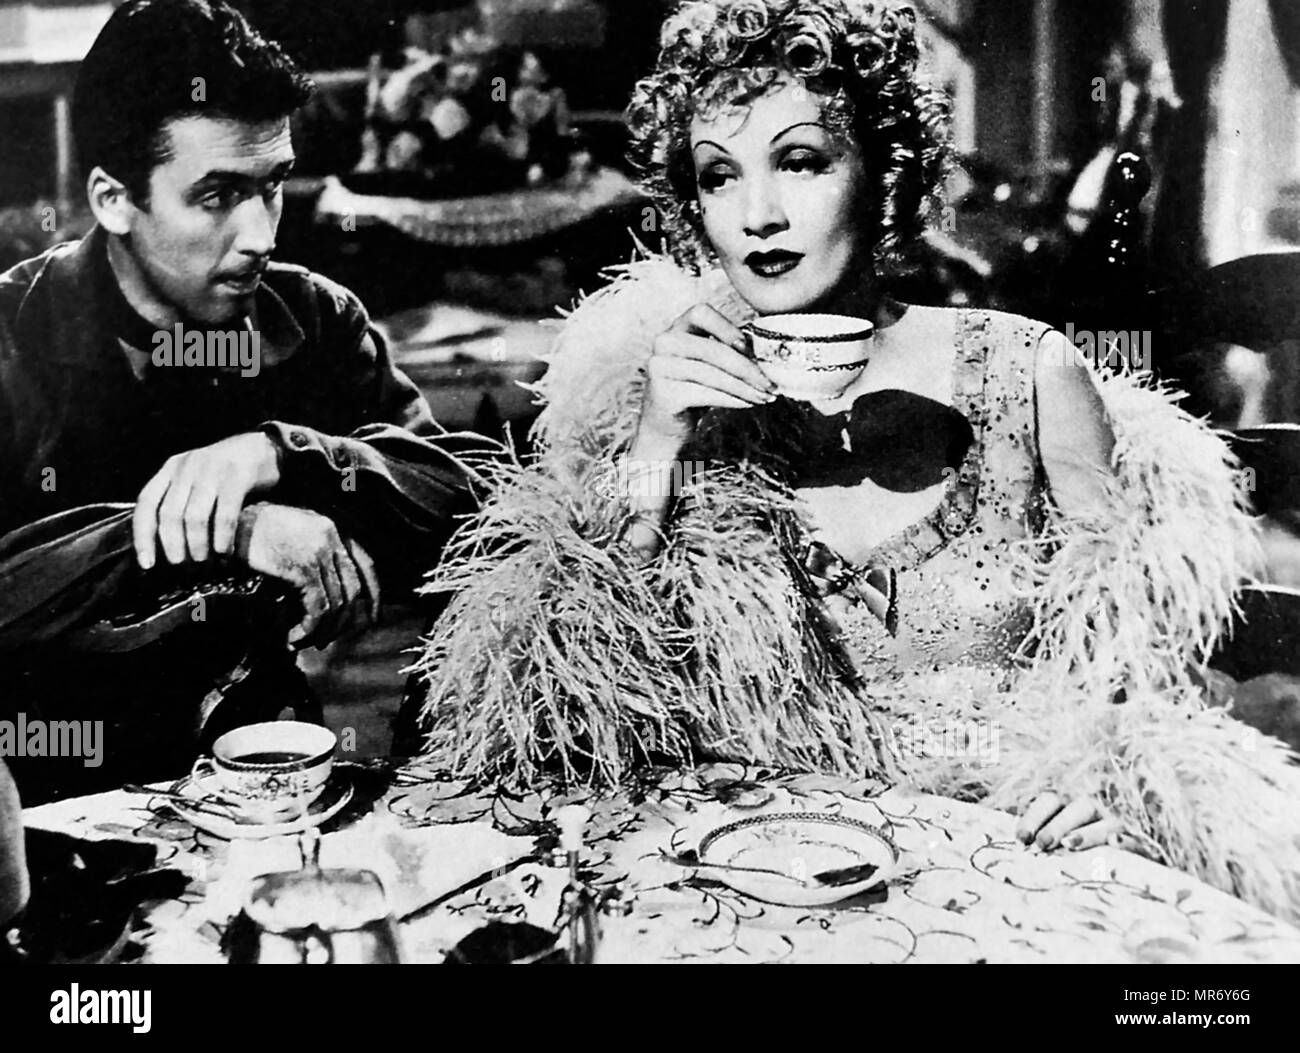 Destry Rides Again is a 1939 western starring Marlene Dietrich and James Stewart, and directed by George Marshall. Stock Photo